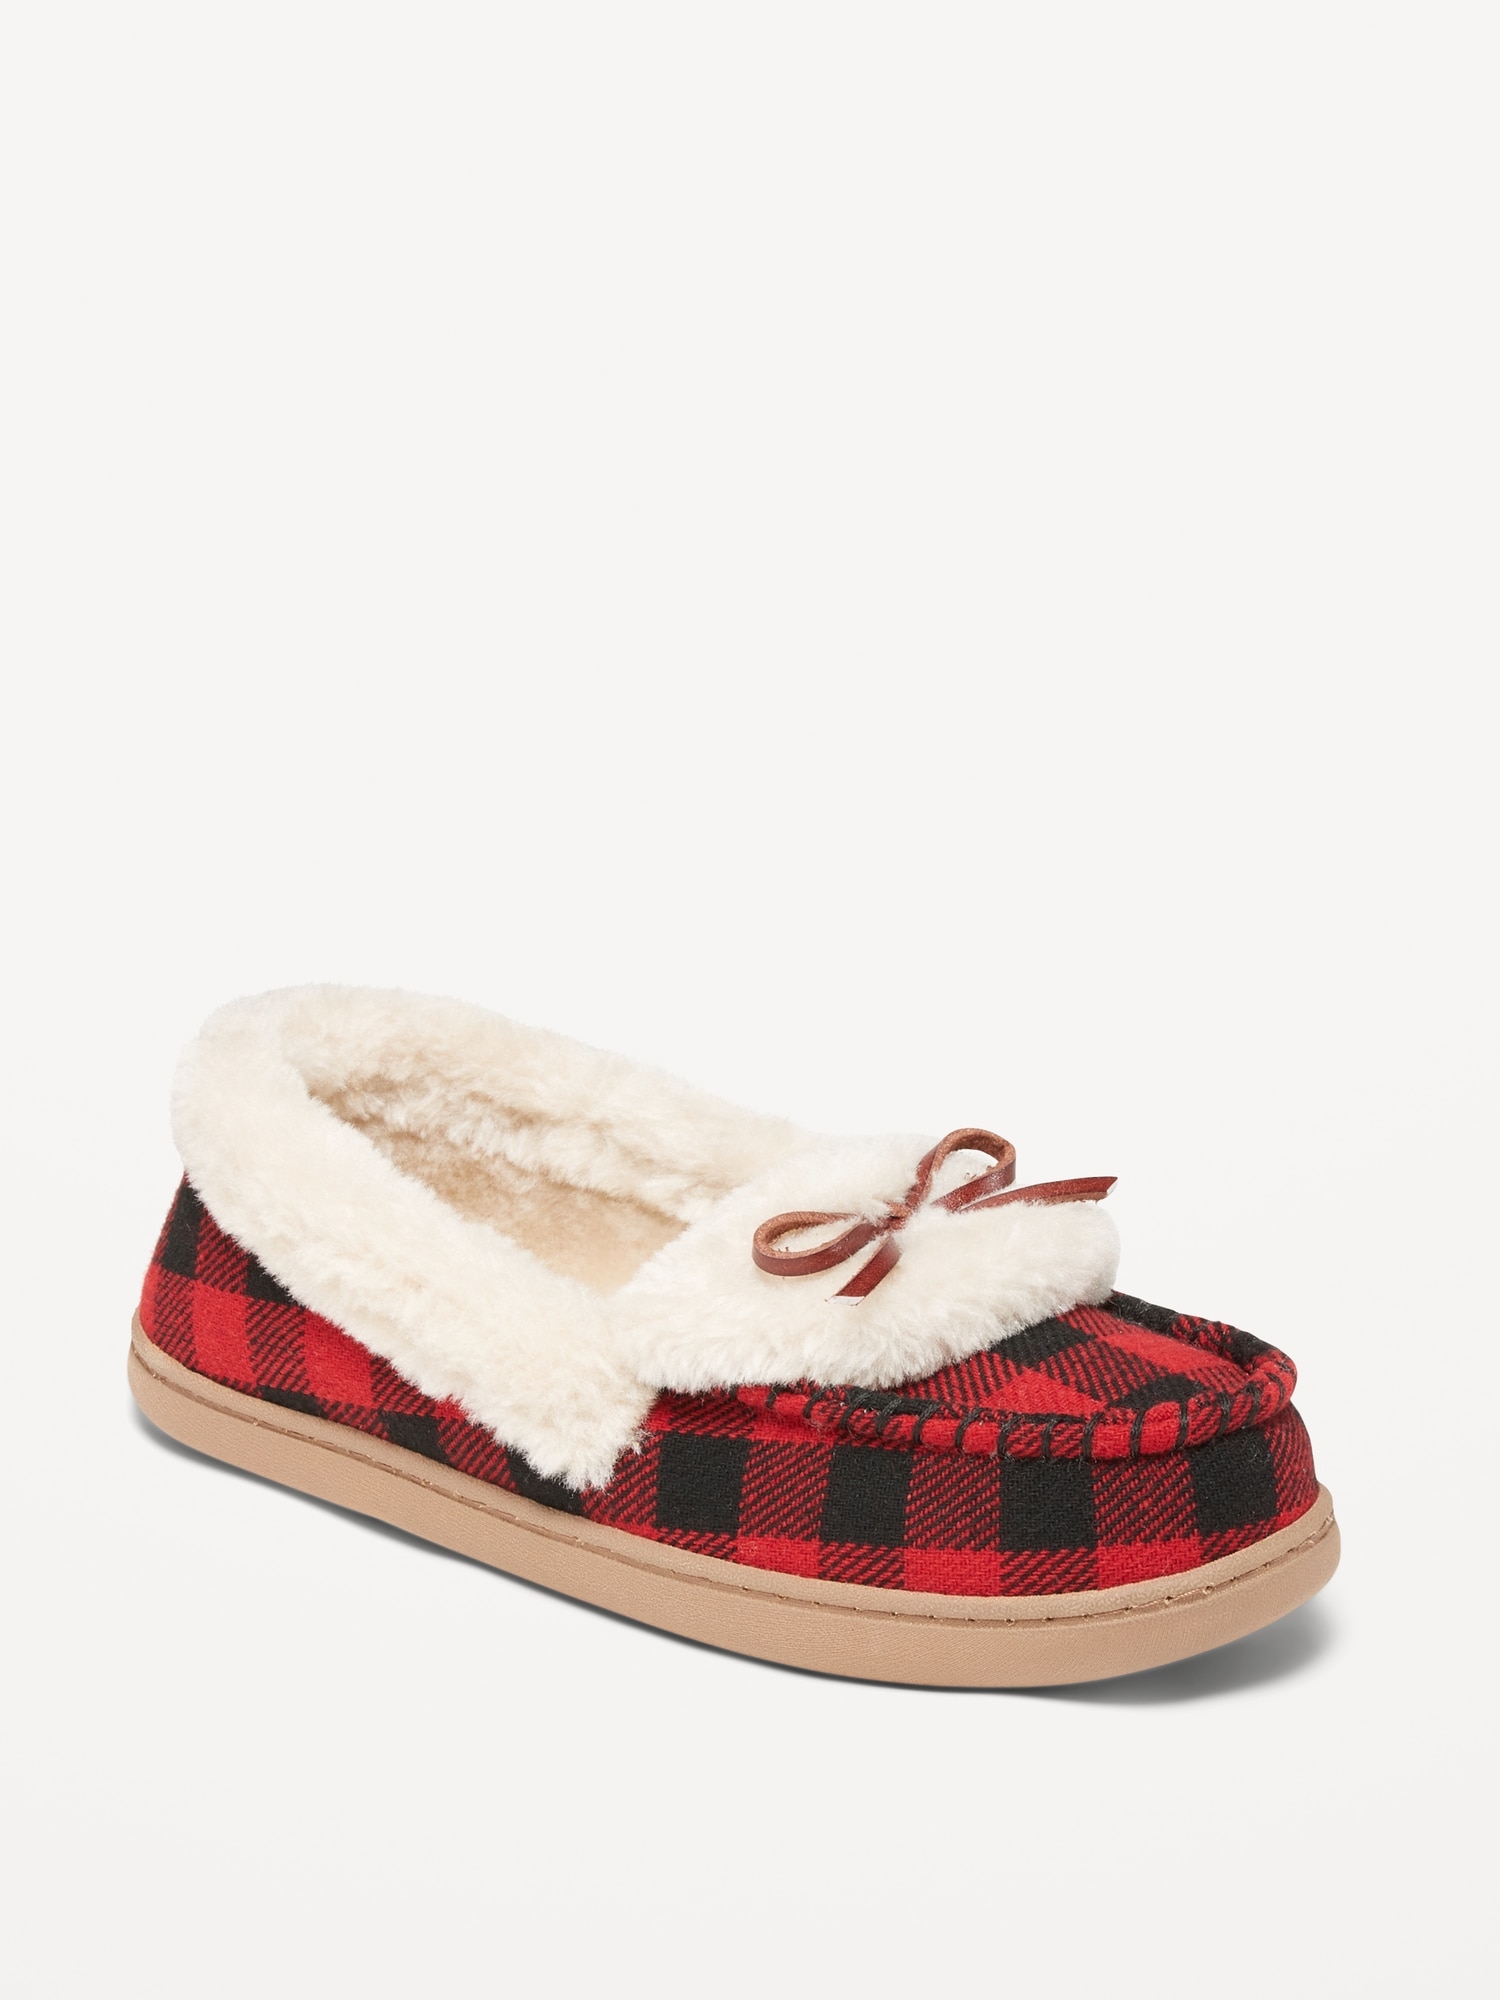 Old Navy Sherpa-Lined Gingham Cozy Moccasin Slippers For Women multi. 1